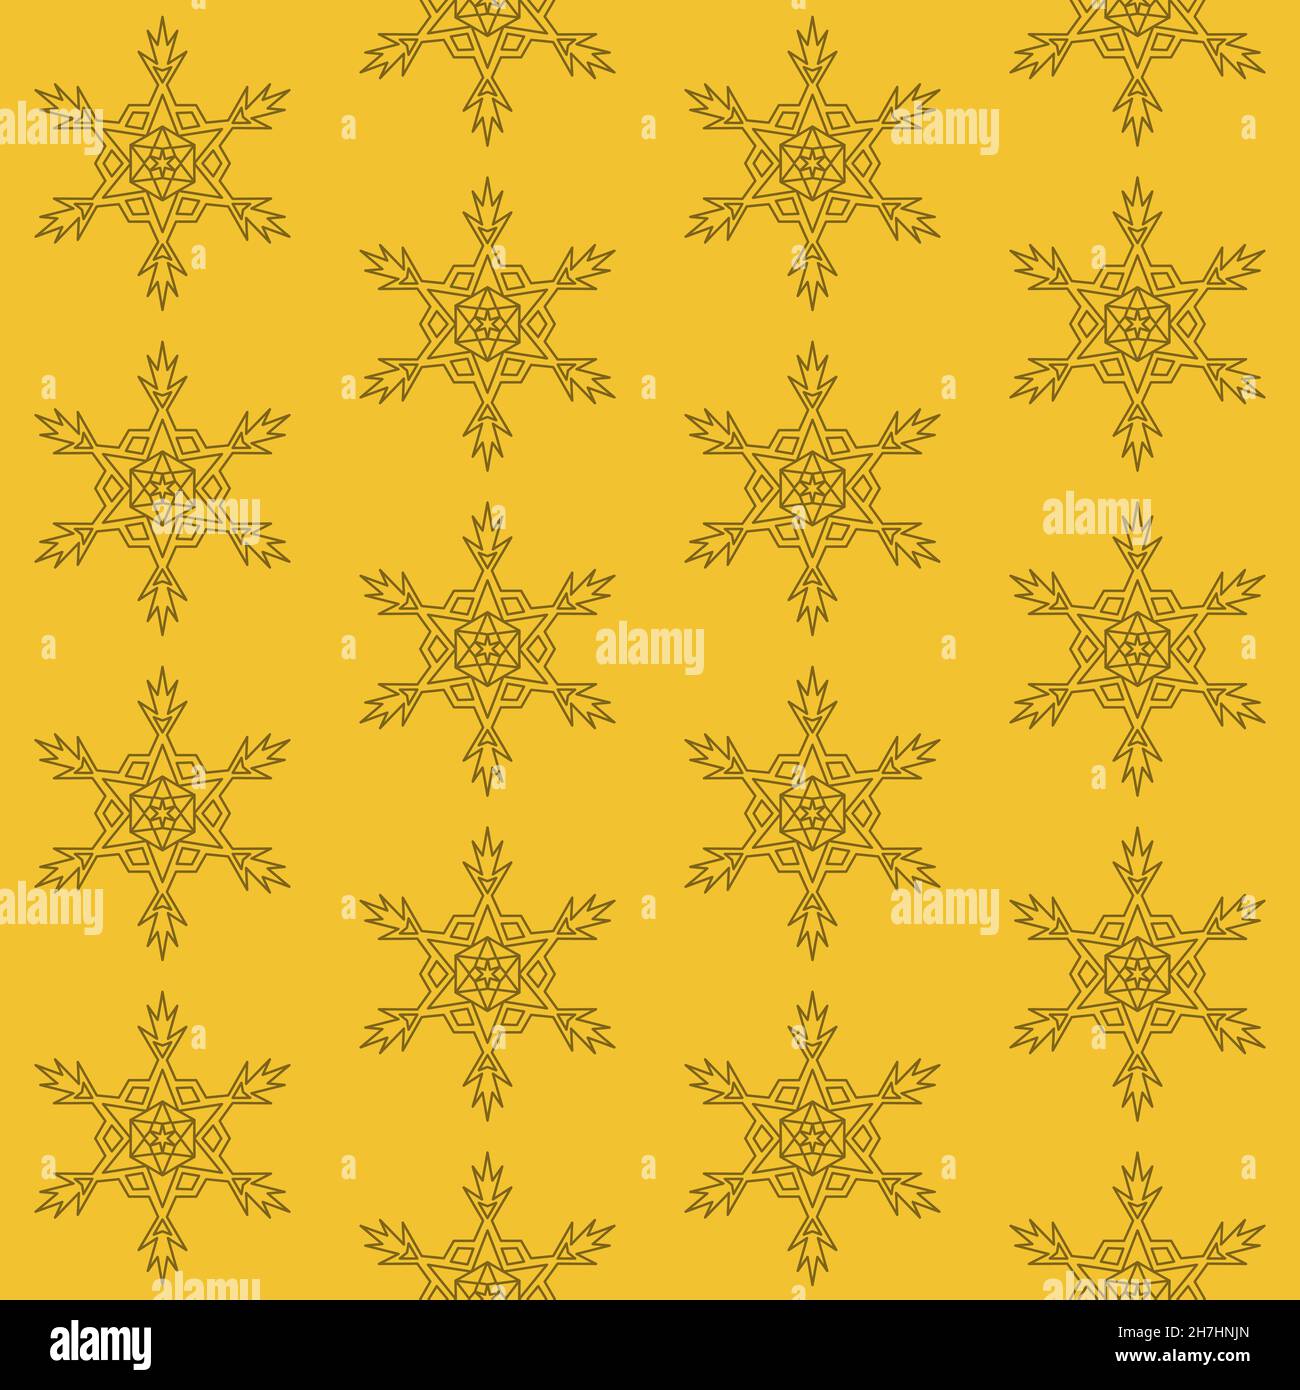 Simple snowflake on yellow background, christmas seamless pattern